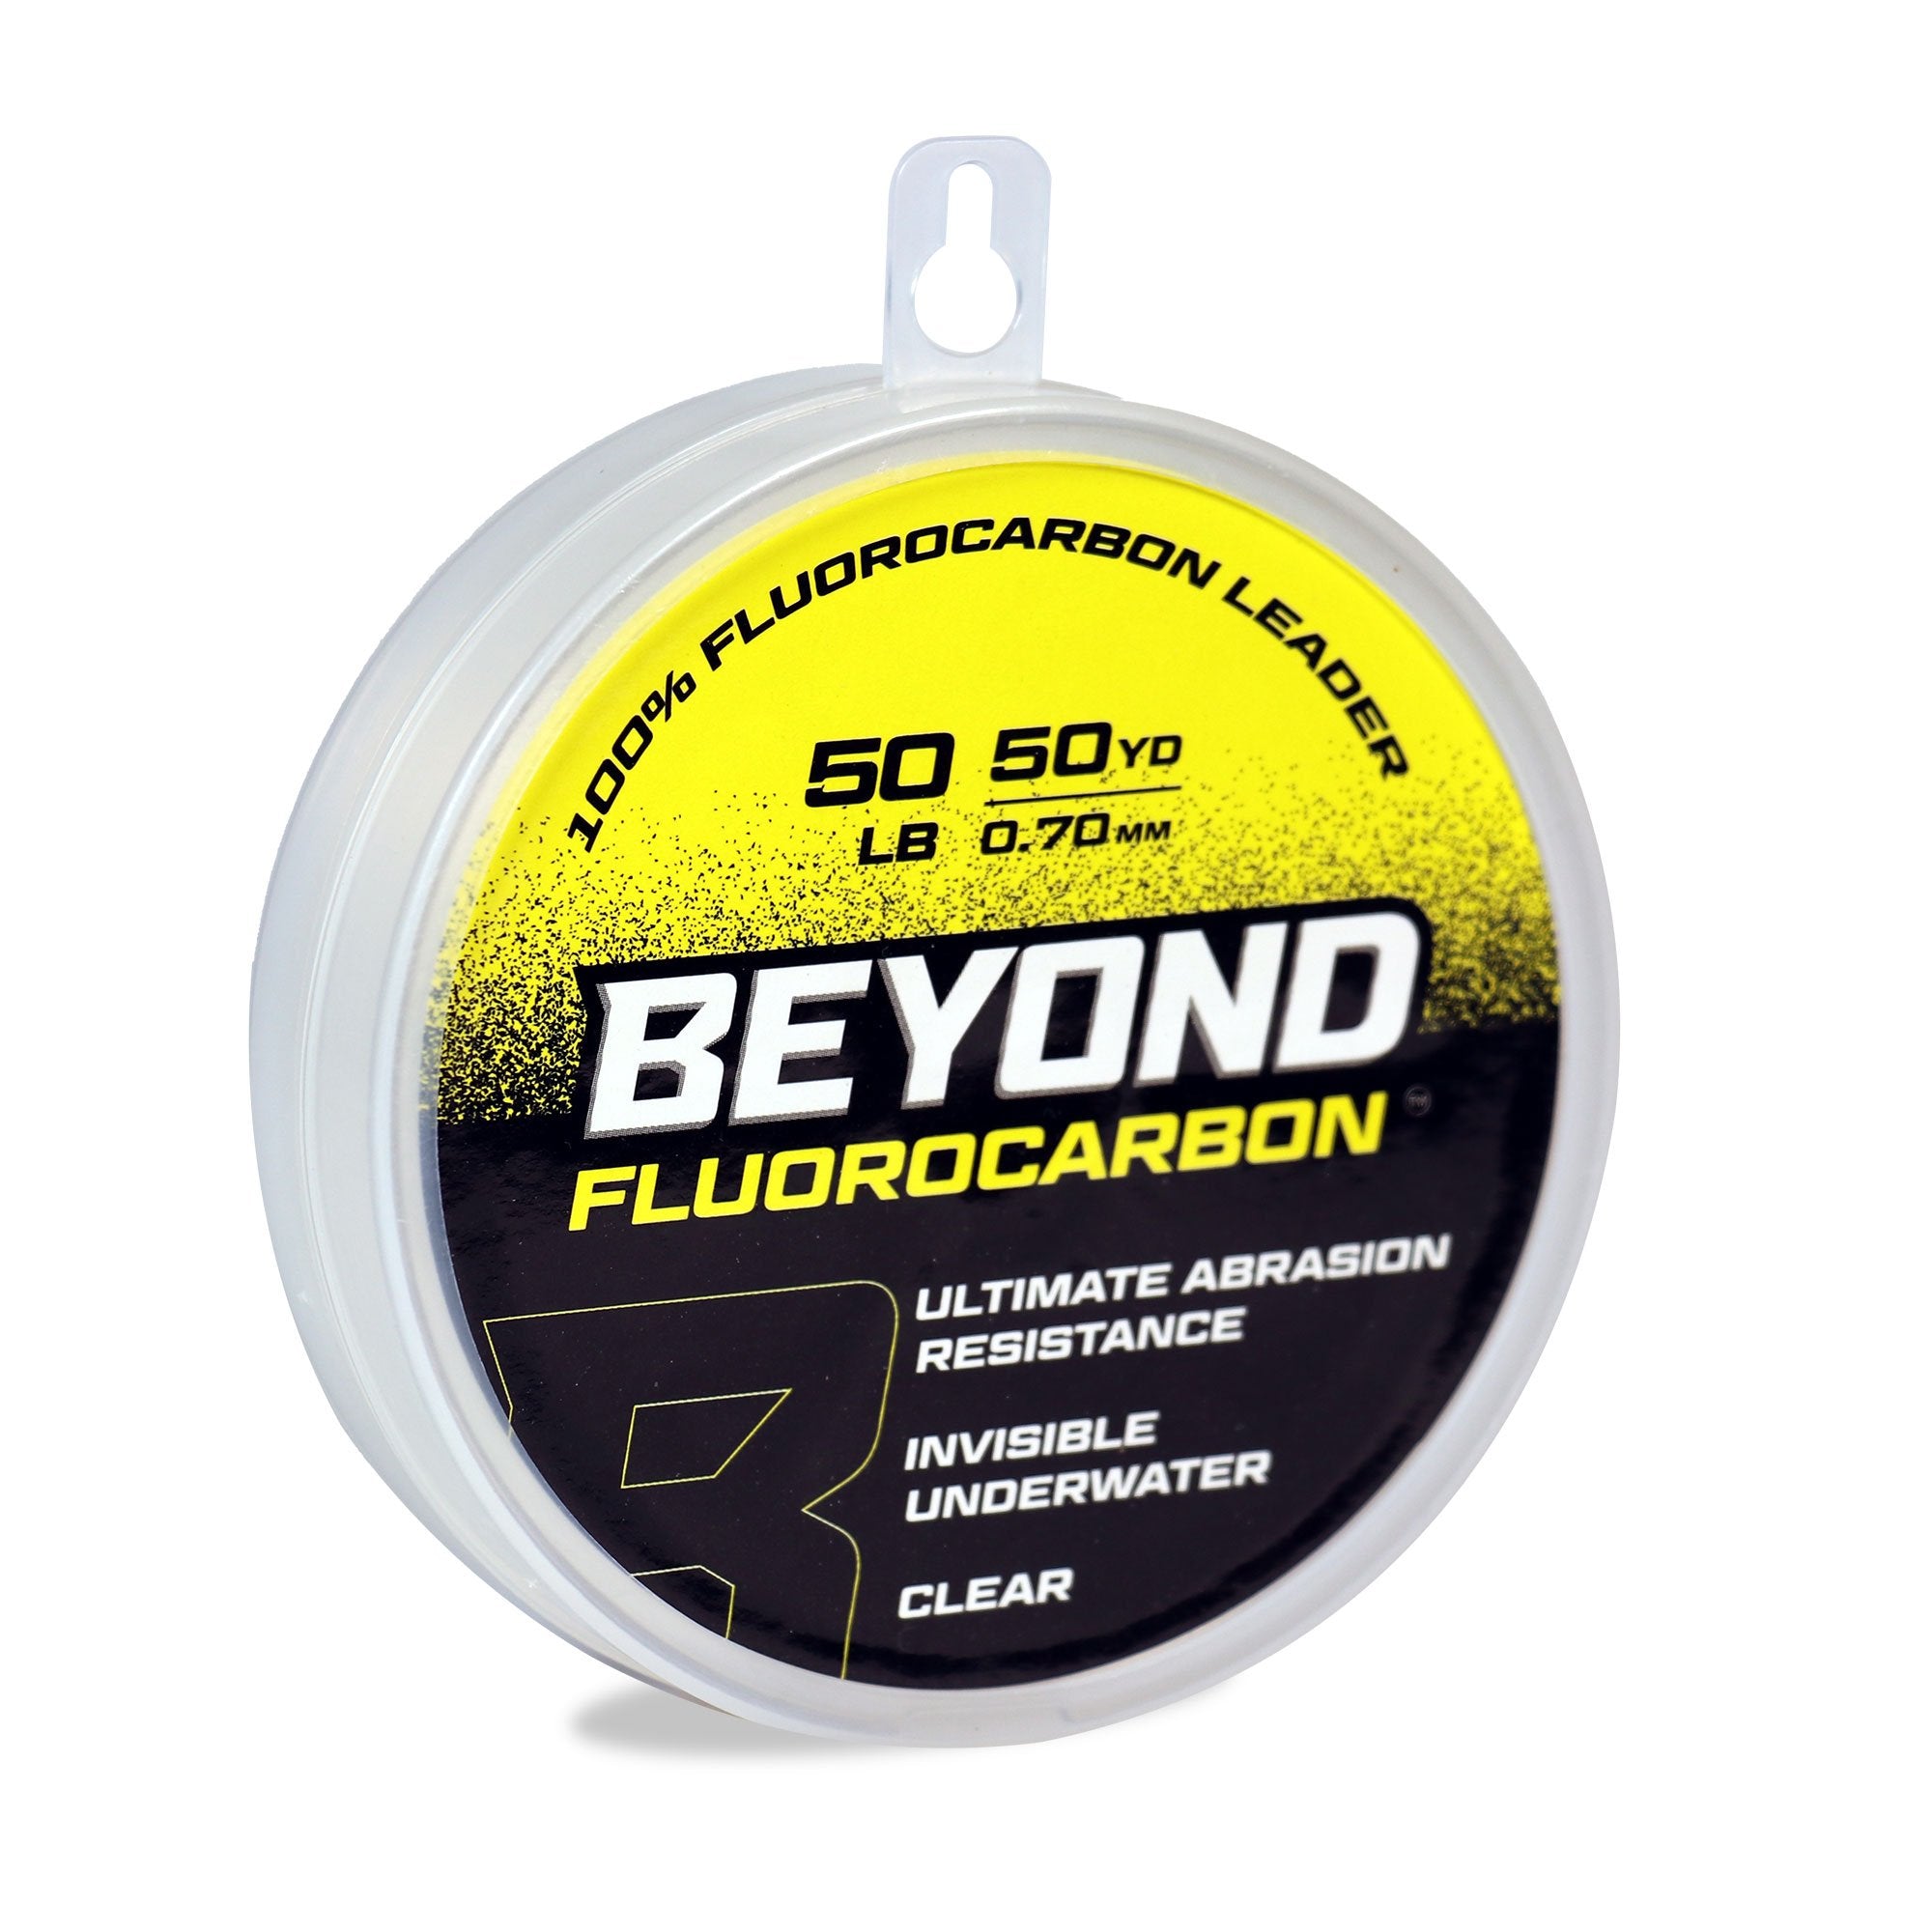 100% Fluorocarbon Fishing Line-Invisible Underwater-Faster Sinking